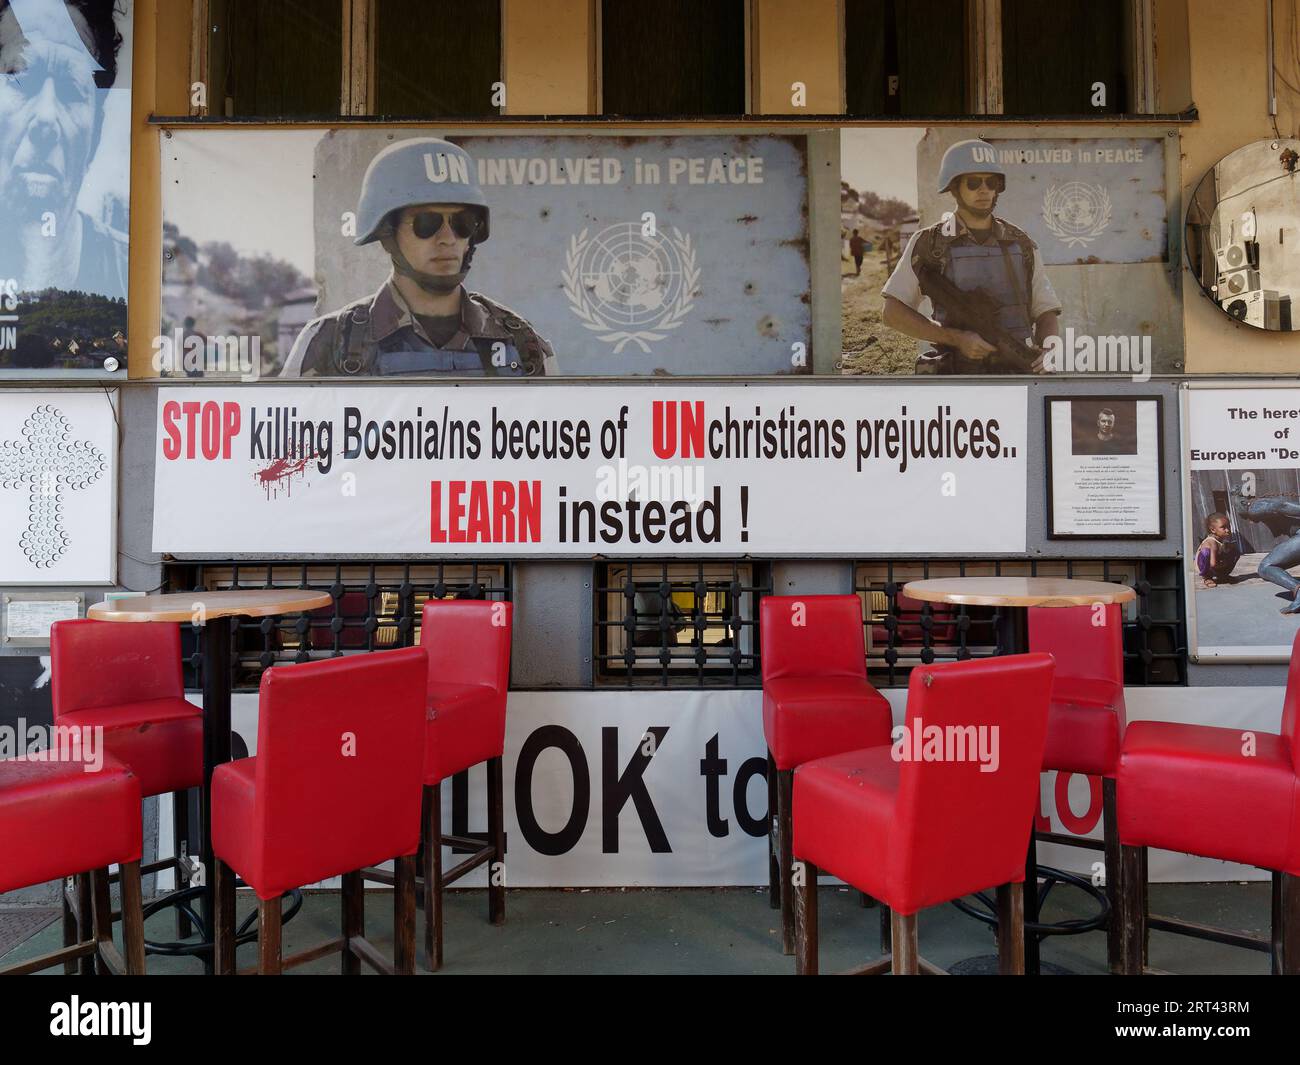 Controversial posters relating to the Bosnian War and the UN Peace Keeping force, city of Sarajevo, Boasnia and Herzegovina. September 10, 2023. Stock Photo